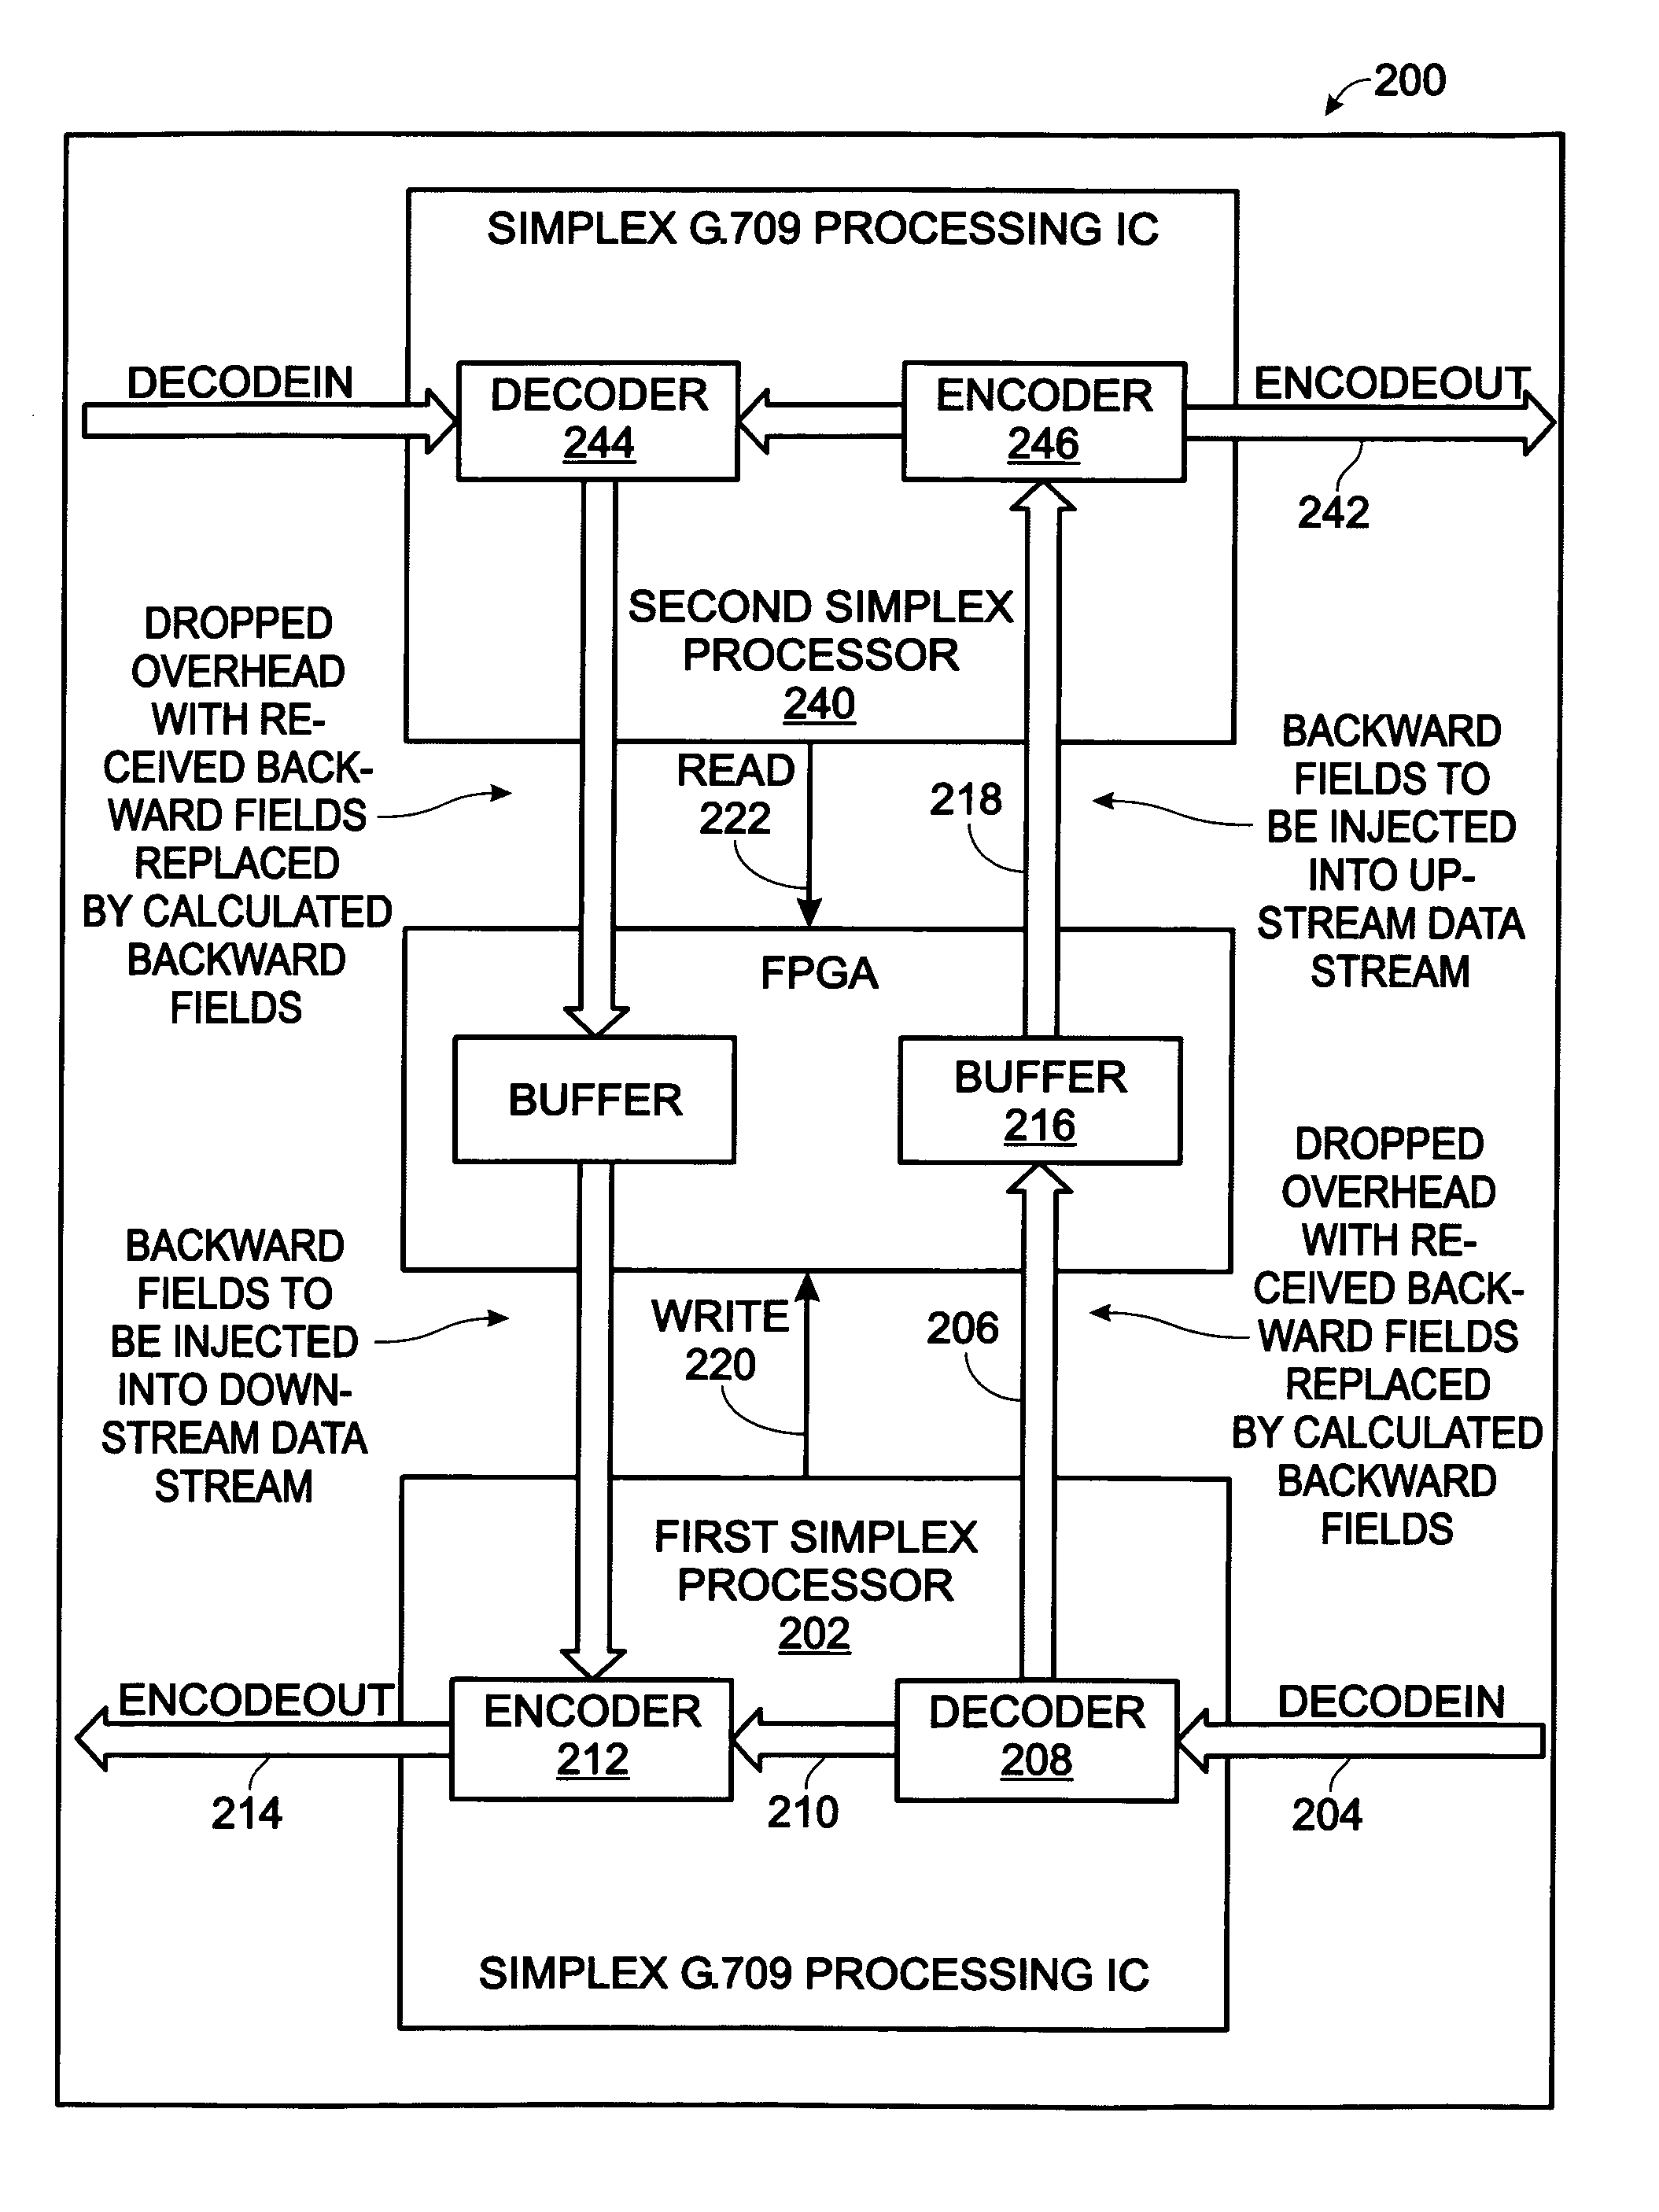 System and method for the transport of backwards information between simplex devices